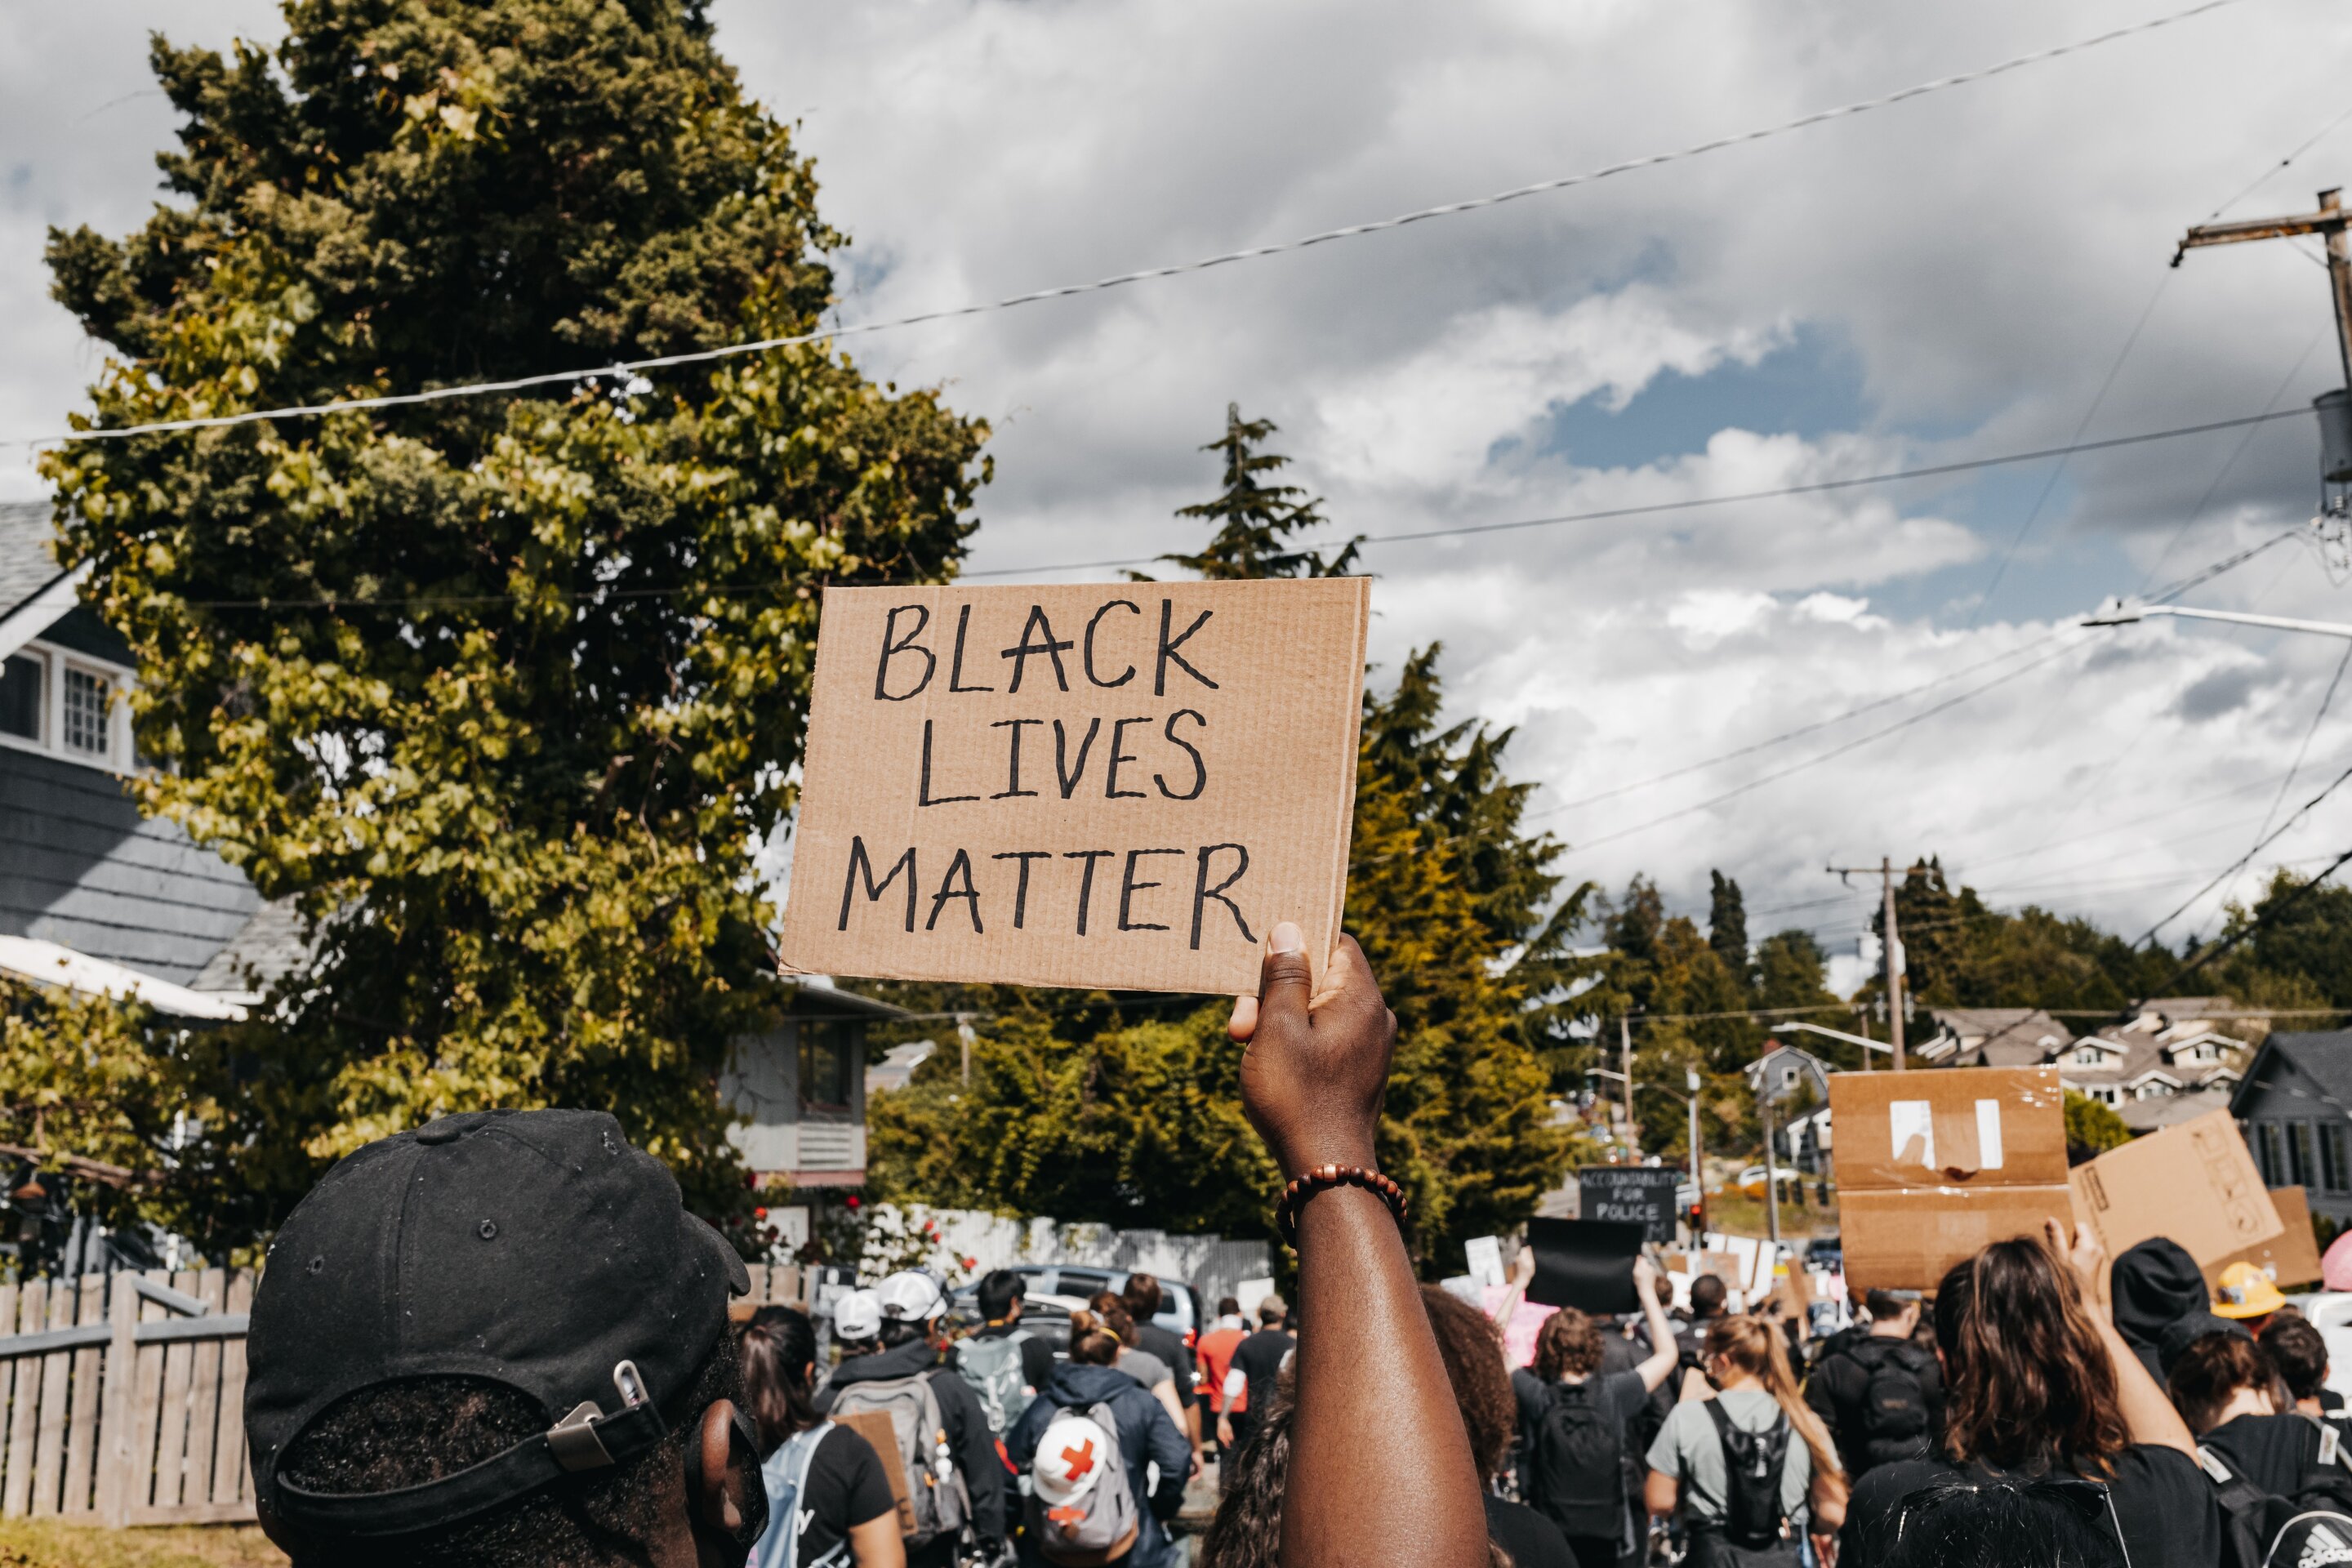 Those who support Black Lives Matter tend to be less hesitant about vaccines, study finds - COVID-19 - Health - Public News Time